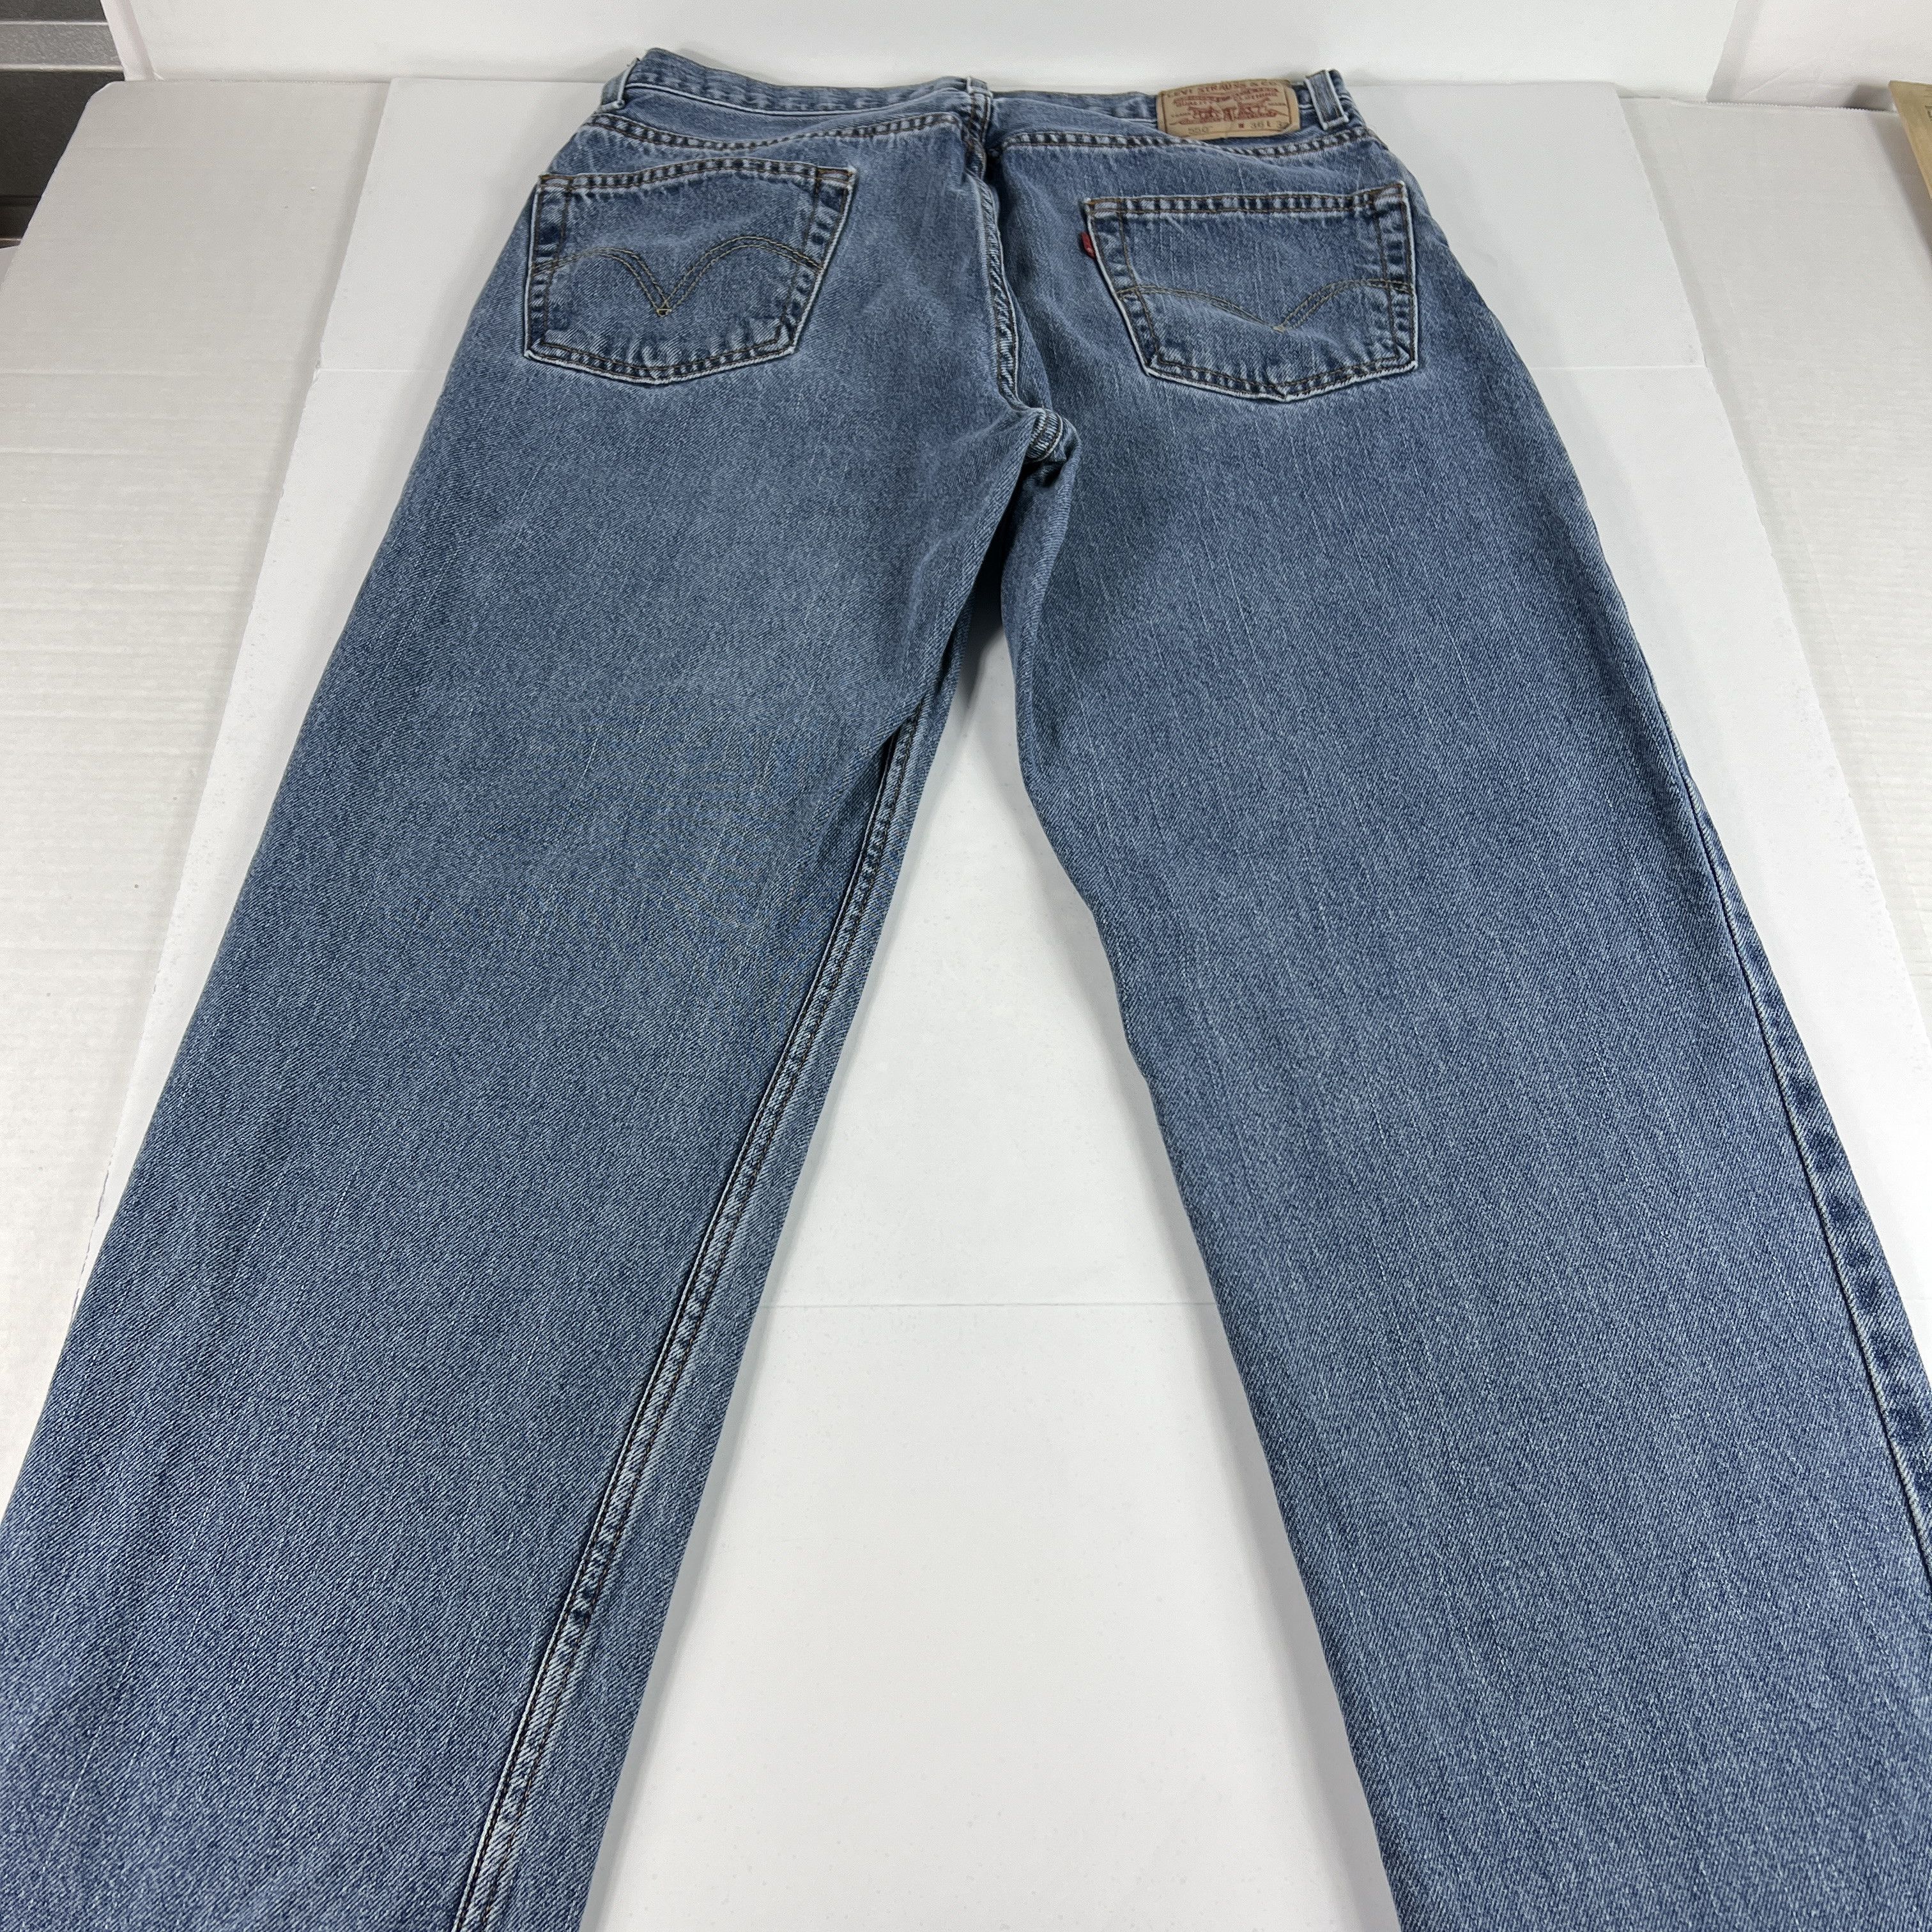 Levi's Y2K Levi's Jean 550 Relaxed Straight Blue Faded Cotton Denim Size US 34 / EU 50 - 10 Thumbnail